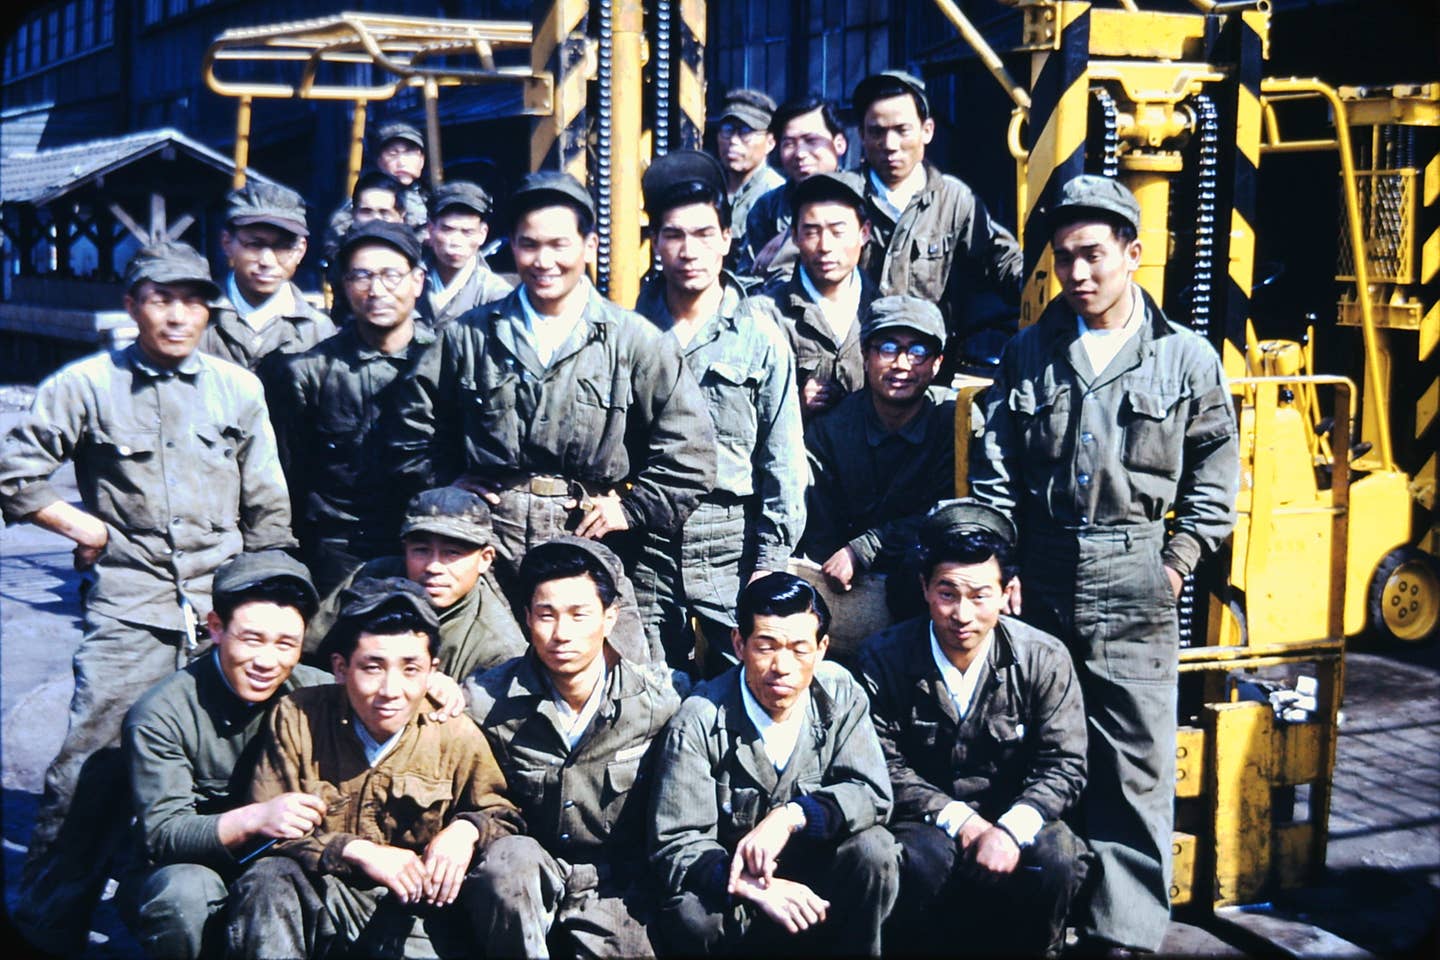 Early photo of a group of Korean Service Corps members during the Korean War circa 1952.